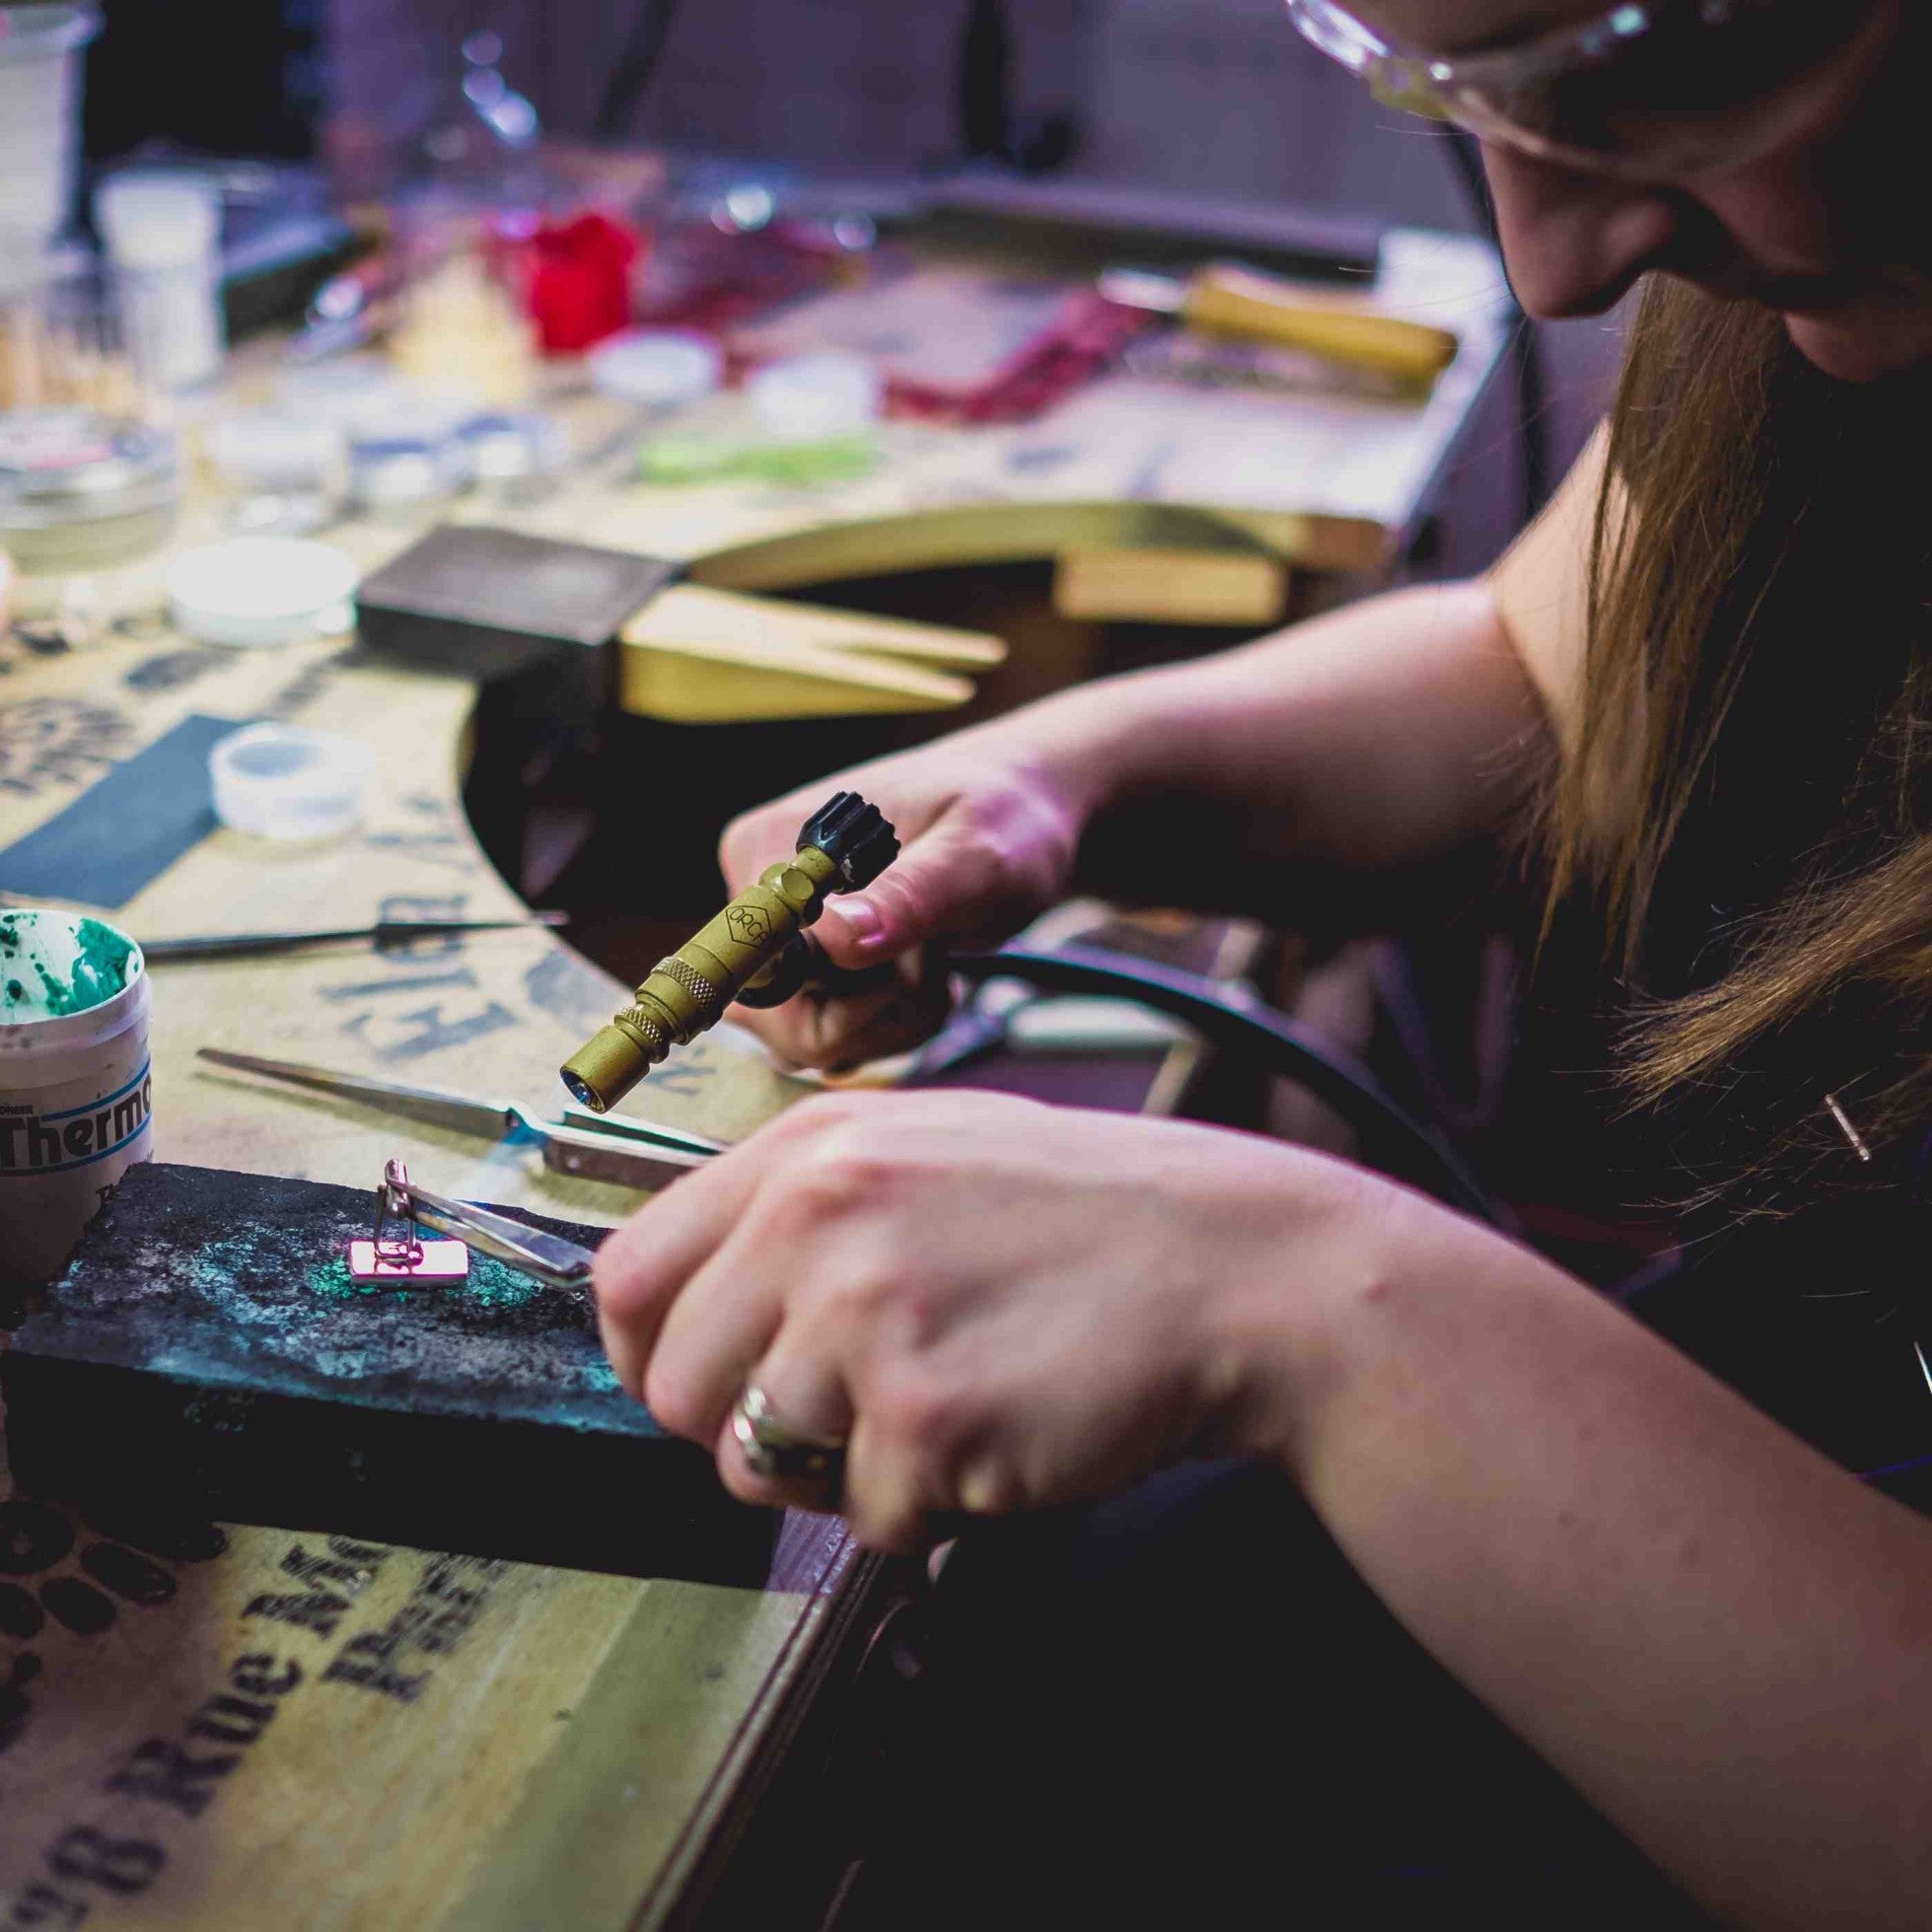 The Sophia Alexander Jewellery workshop.  Image shows Lucille Whiting soldering the back onto a gold footprint cufflink using a torch.  Tools can be seen scattered over the jewellery bench in the background.